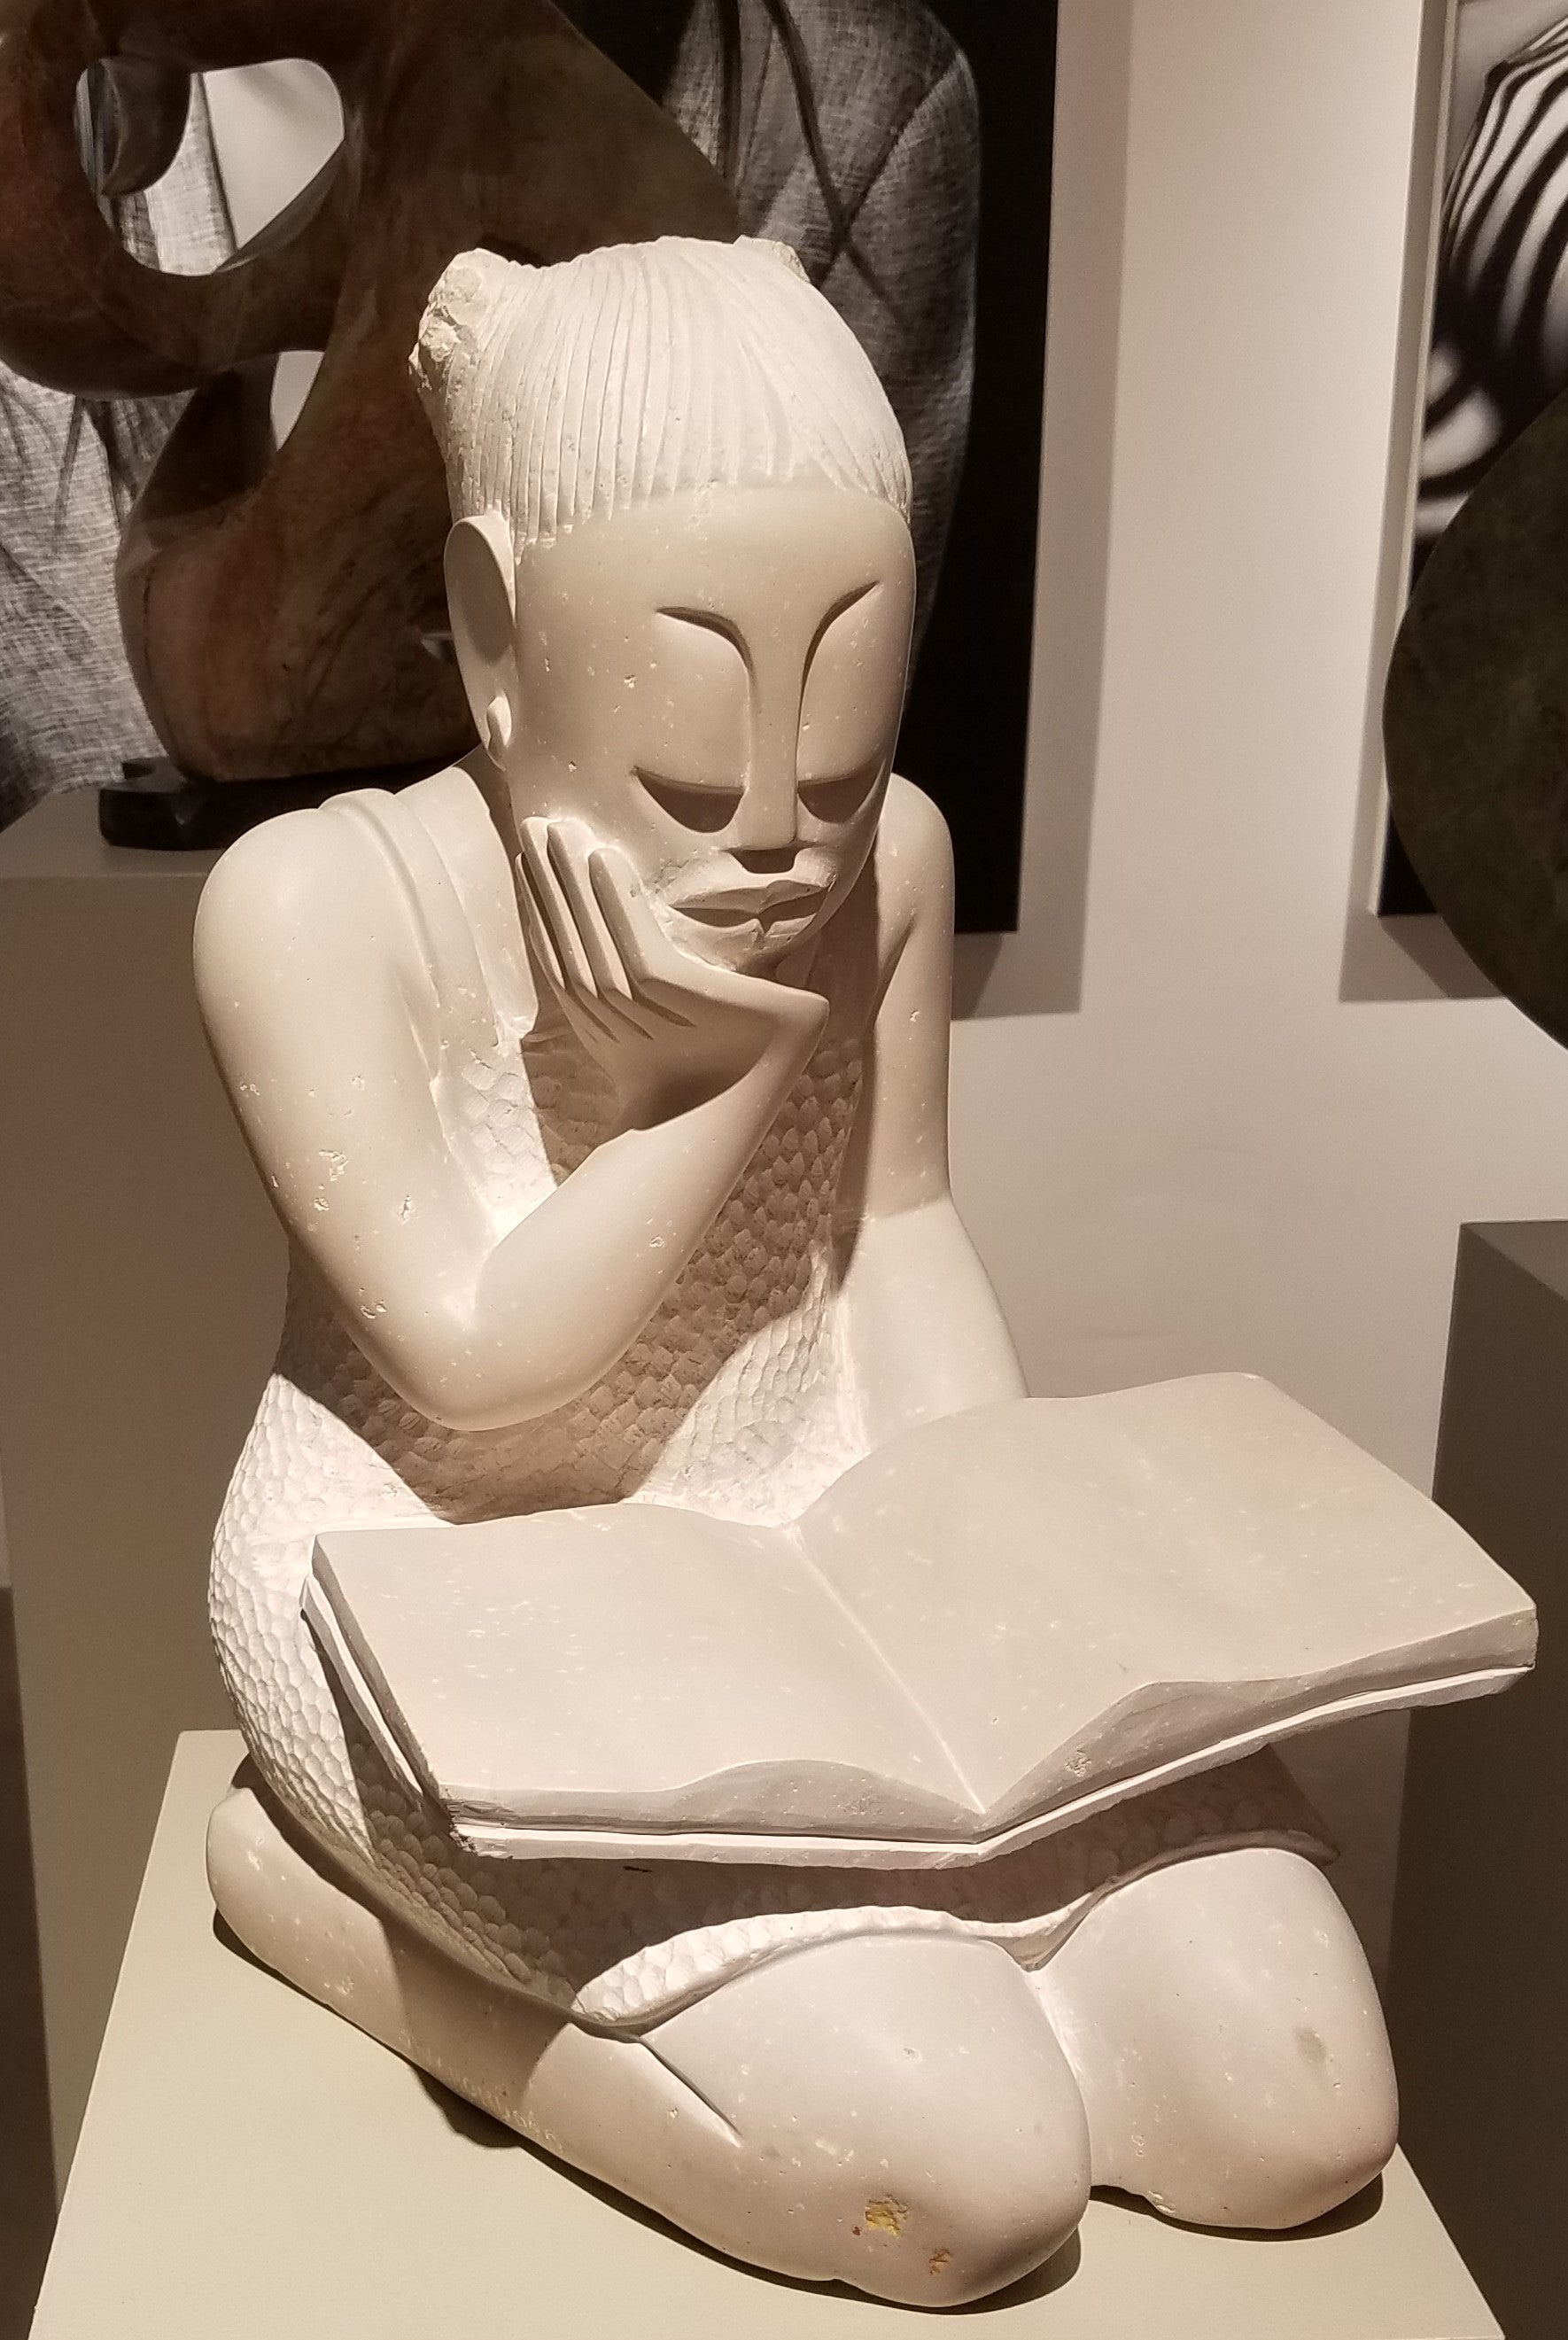 Stone sculpture of a girl reading a book. The stone color is white, with the more sanded and smooth areas being slightly a cream color, or off white. The dimensions are 16.5”H x 10”W x 11.5”D - 60 lbs.